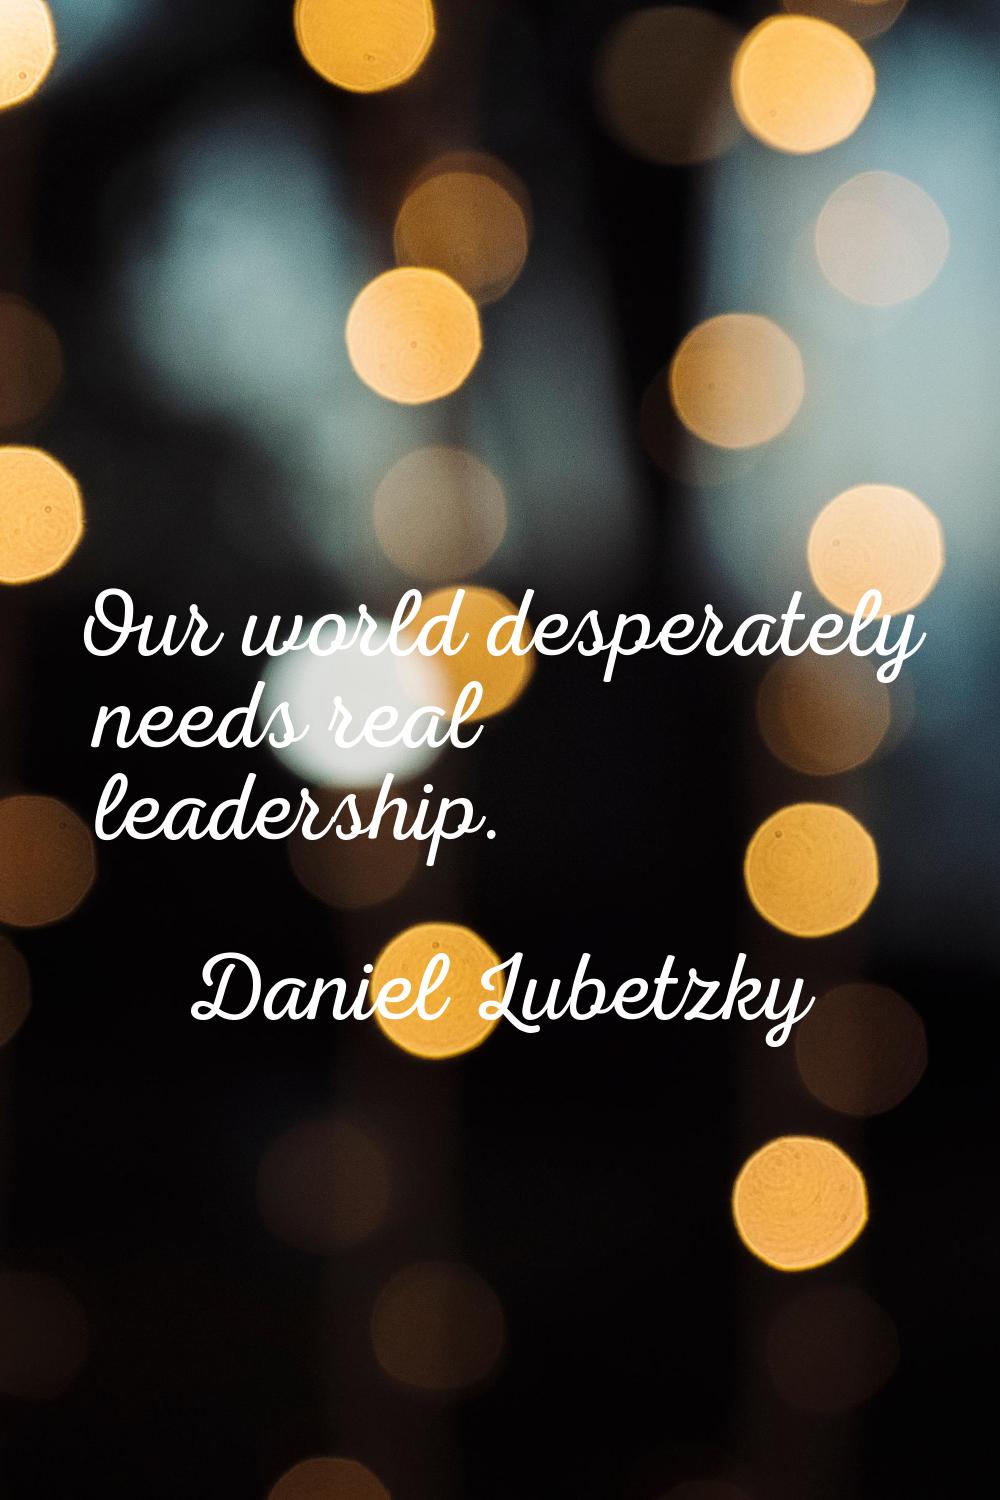 Our world desperately needs real leadership.